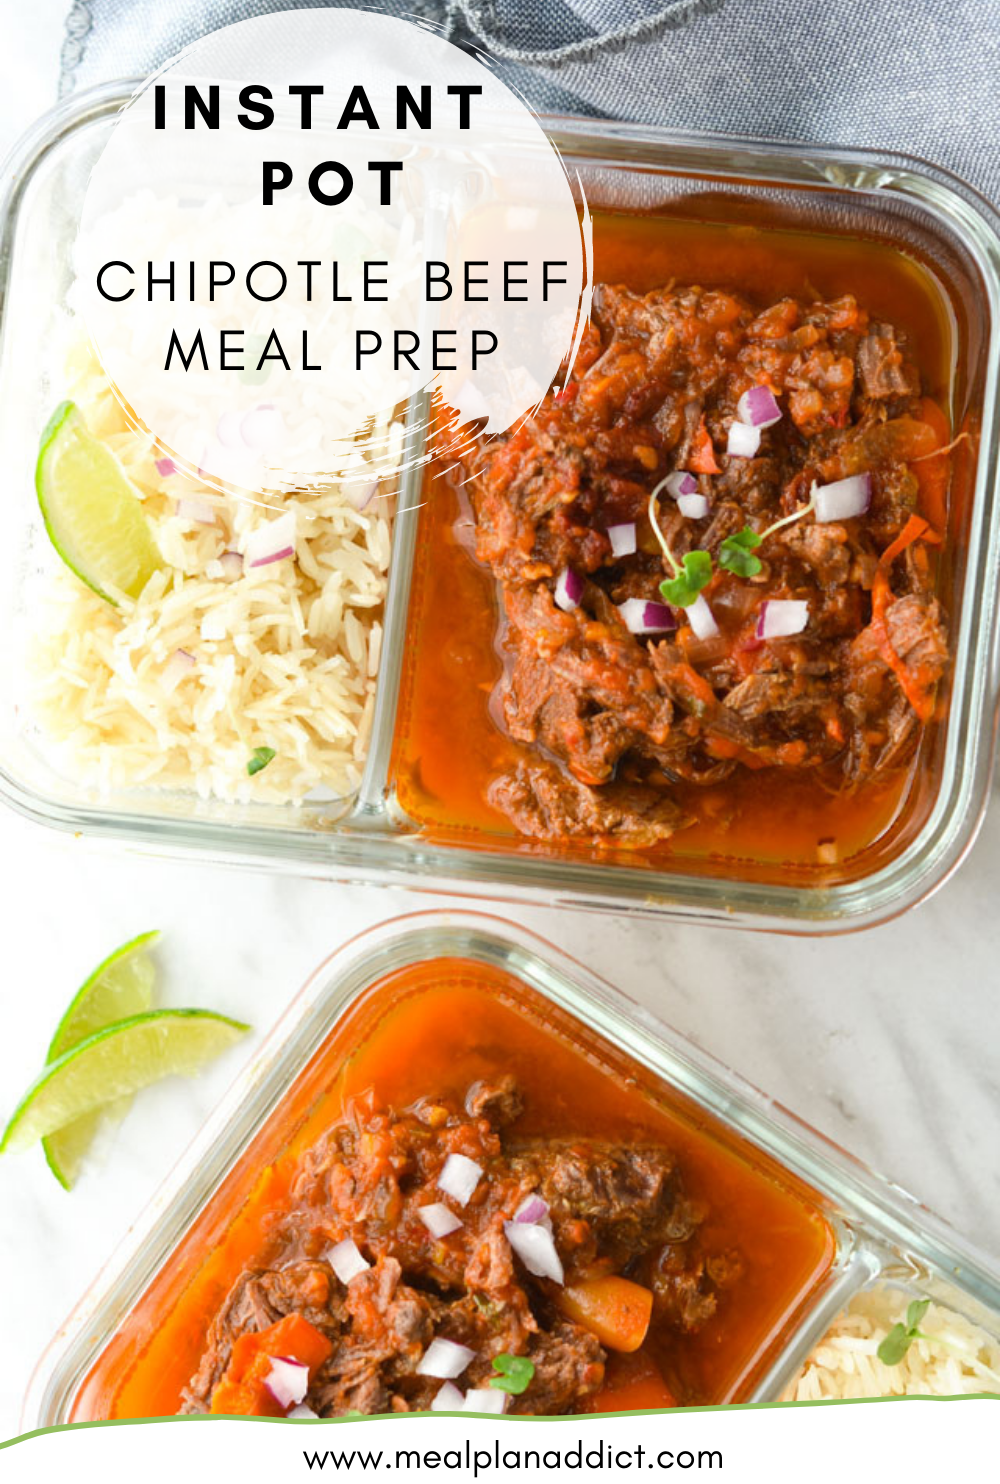 Instant Pot Chipotle Beef Meal Prep